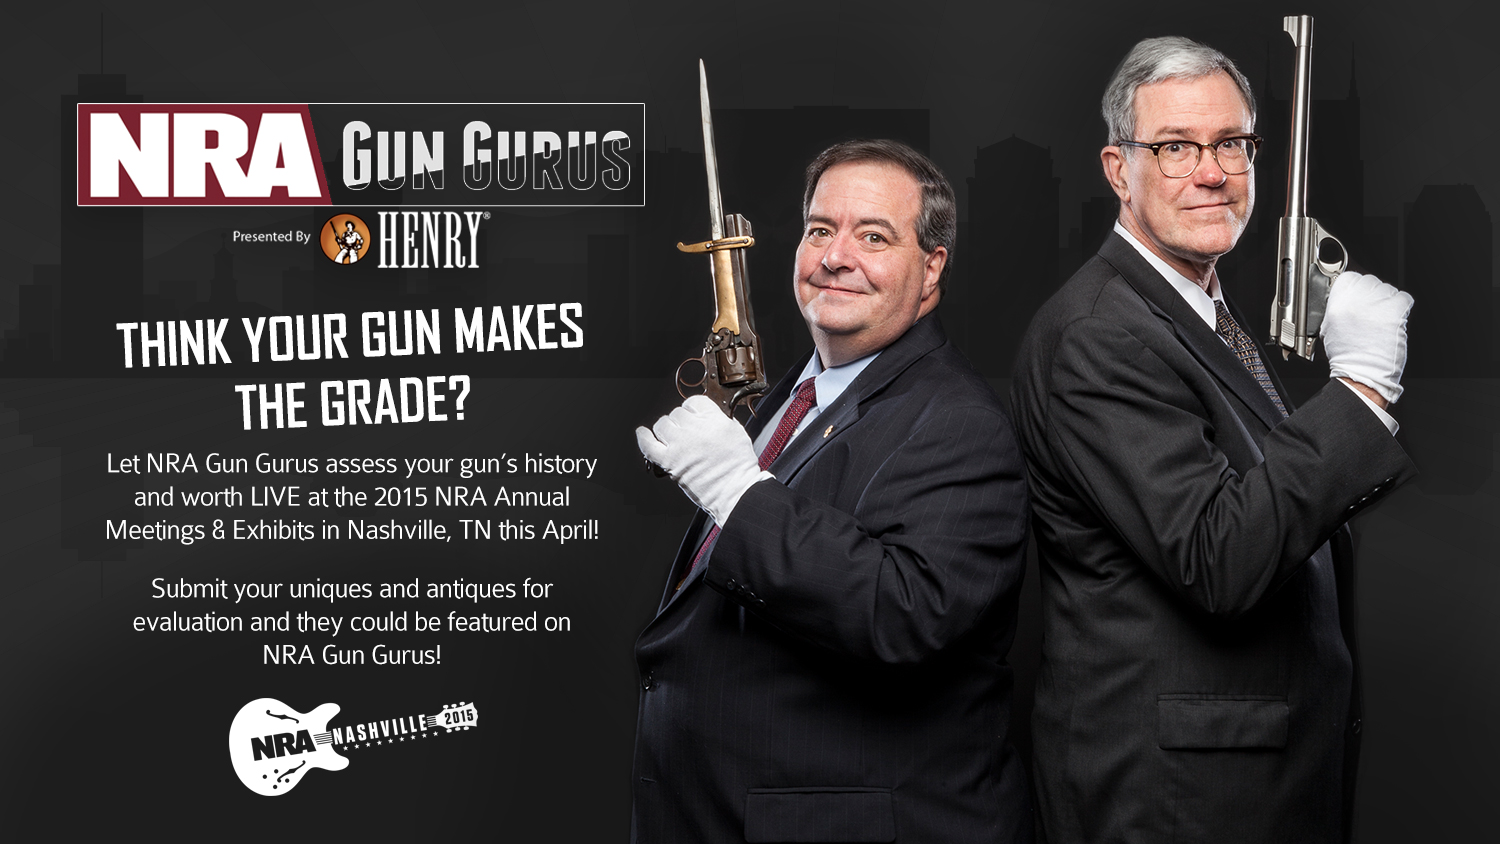 Your gun could be featured on NRA Gun Gurus!